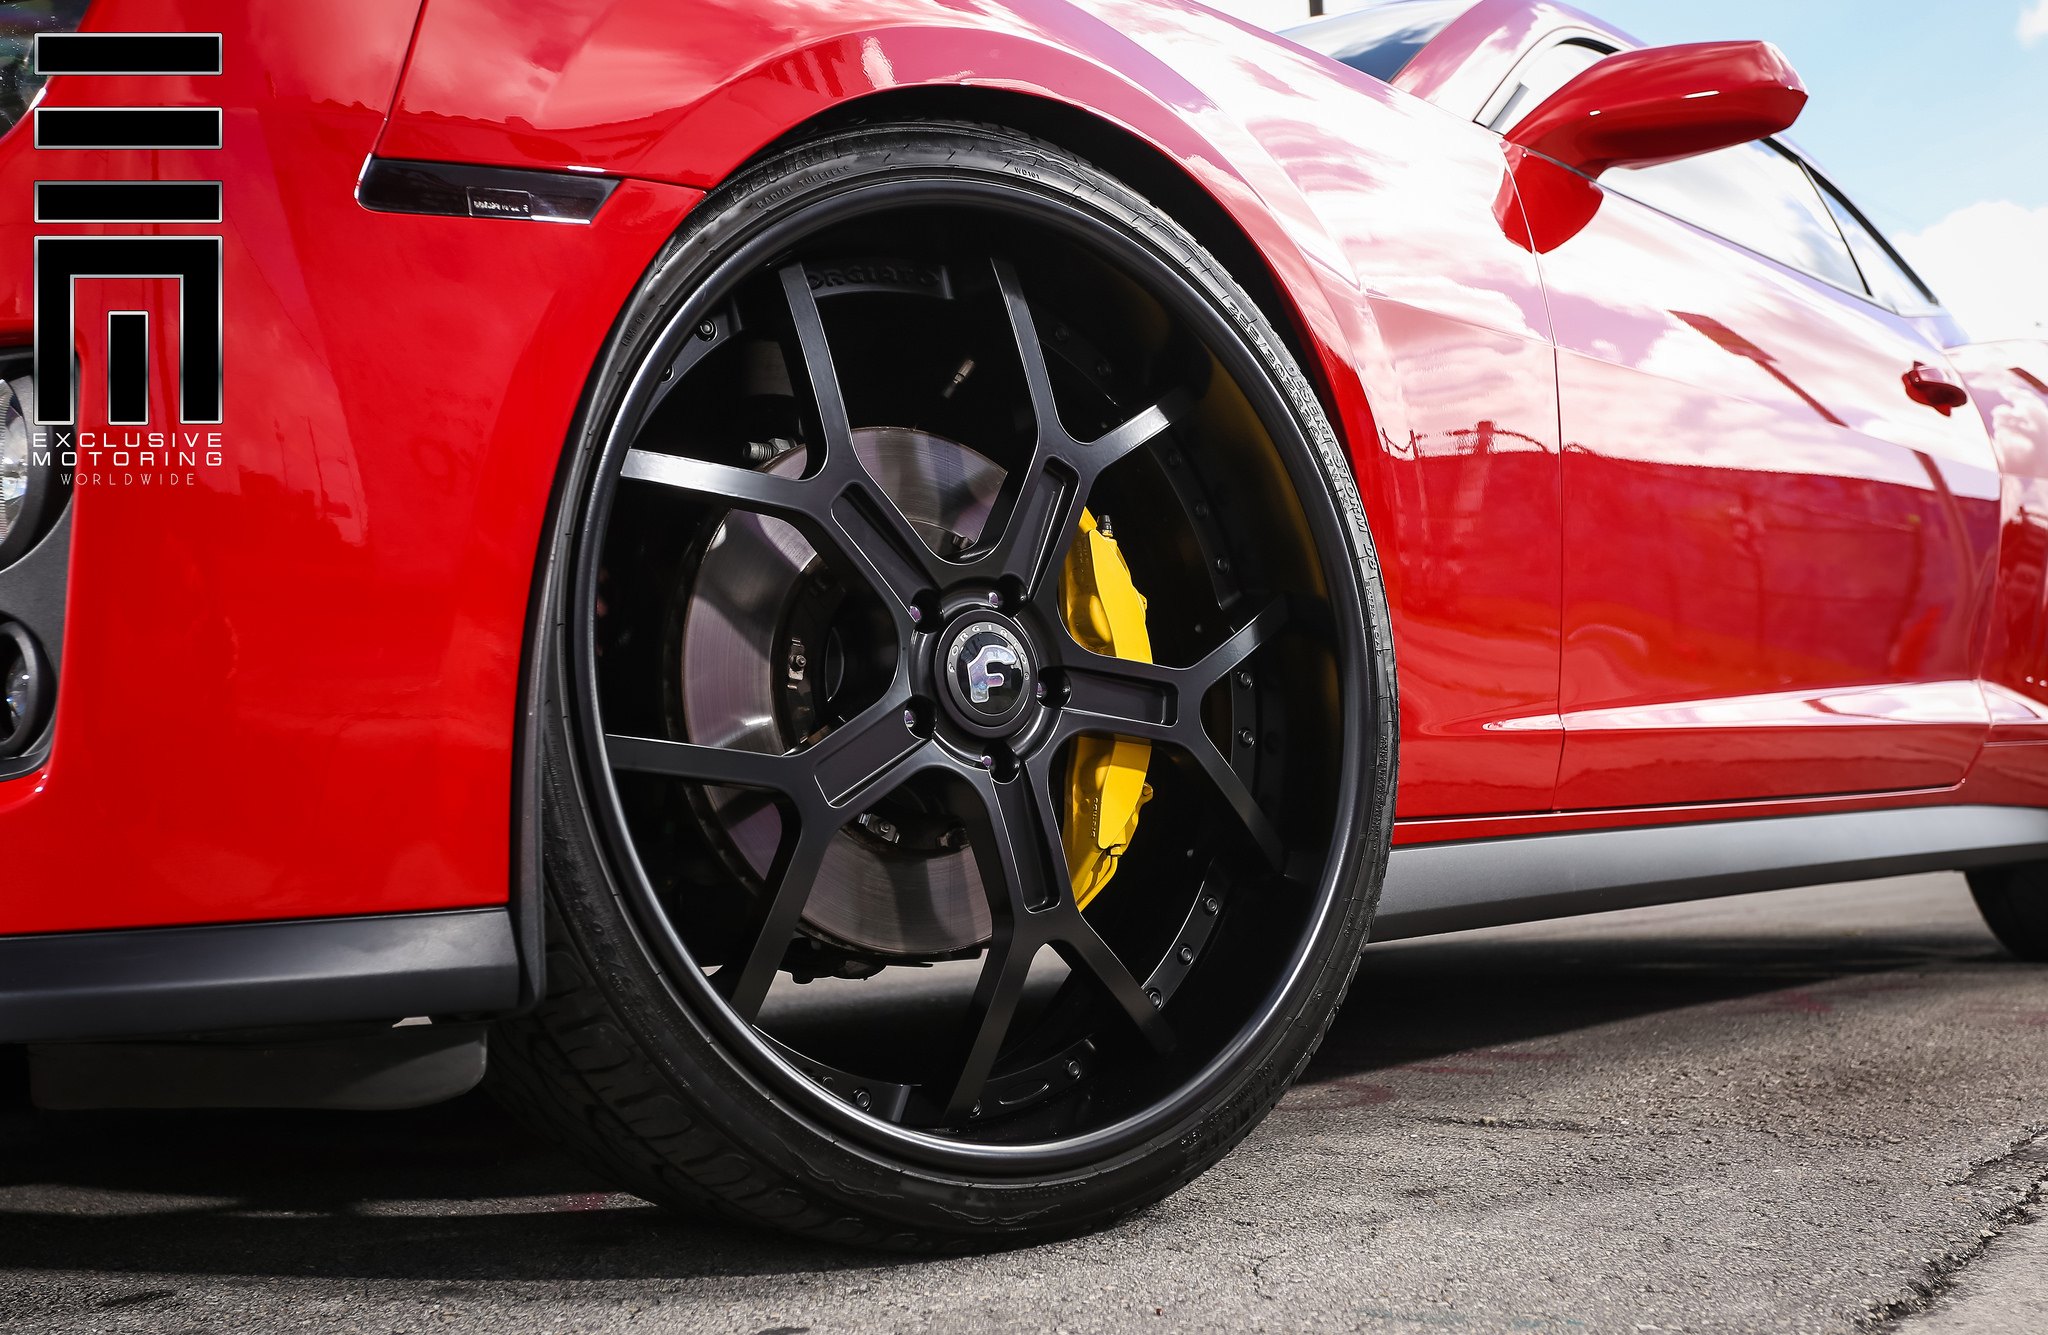 Custom Colored Forgiato Wheel on Chevy Camaro ZL1 - Photo by Exclusive Motoring